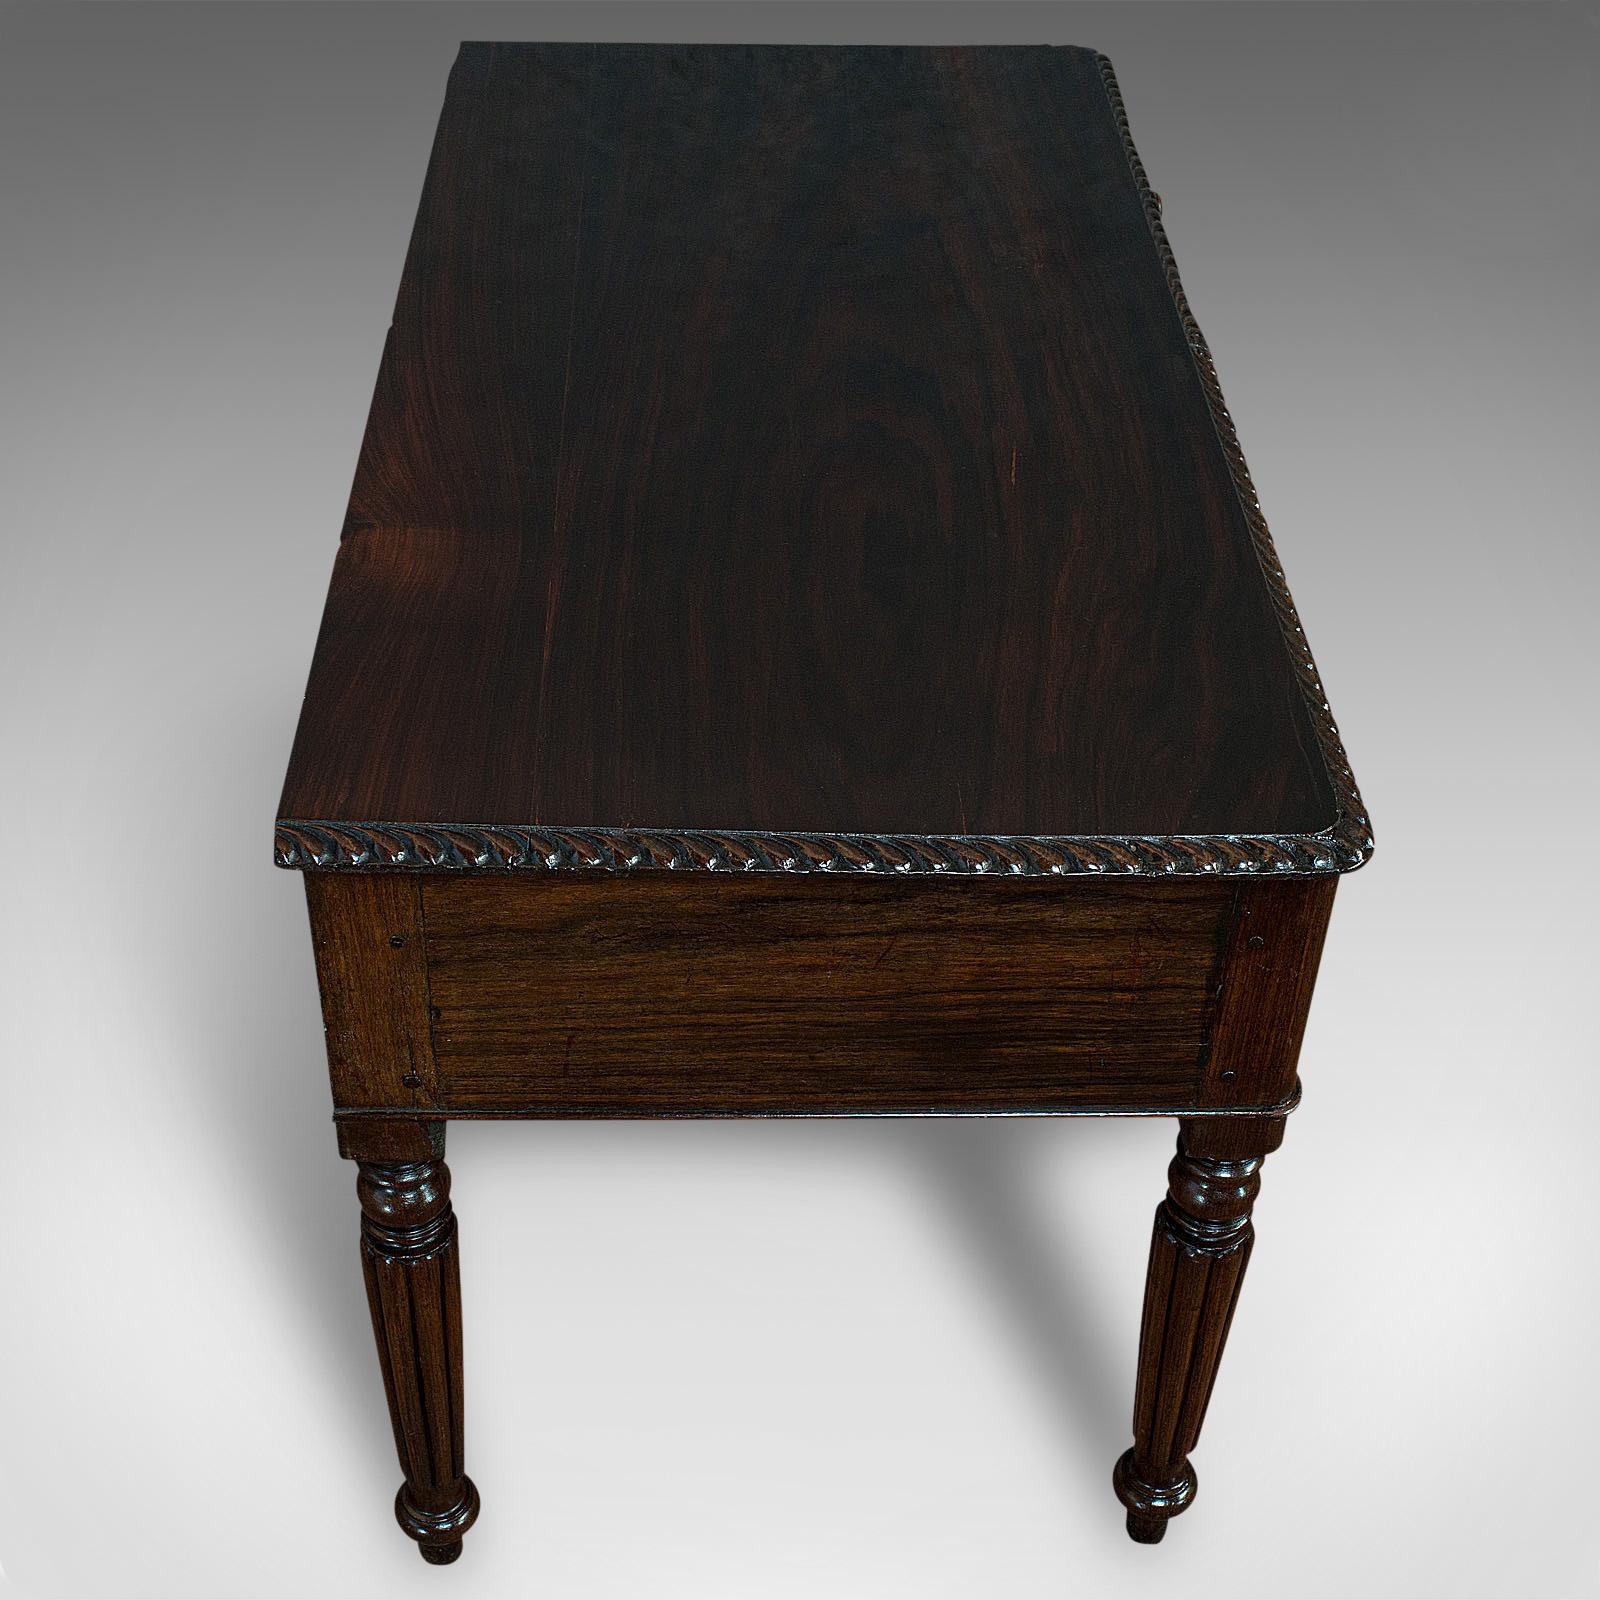 Antique Writing Desk, English, Rosewood, Study, Side, Table, Regency, circa 1820 For Sale 1